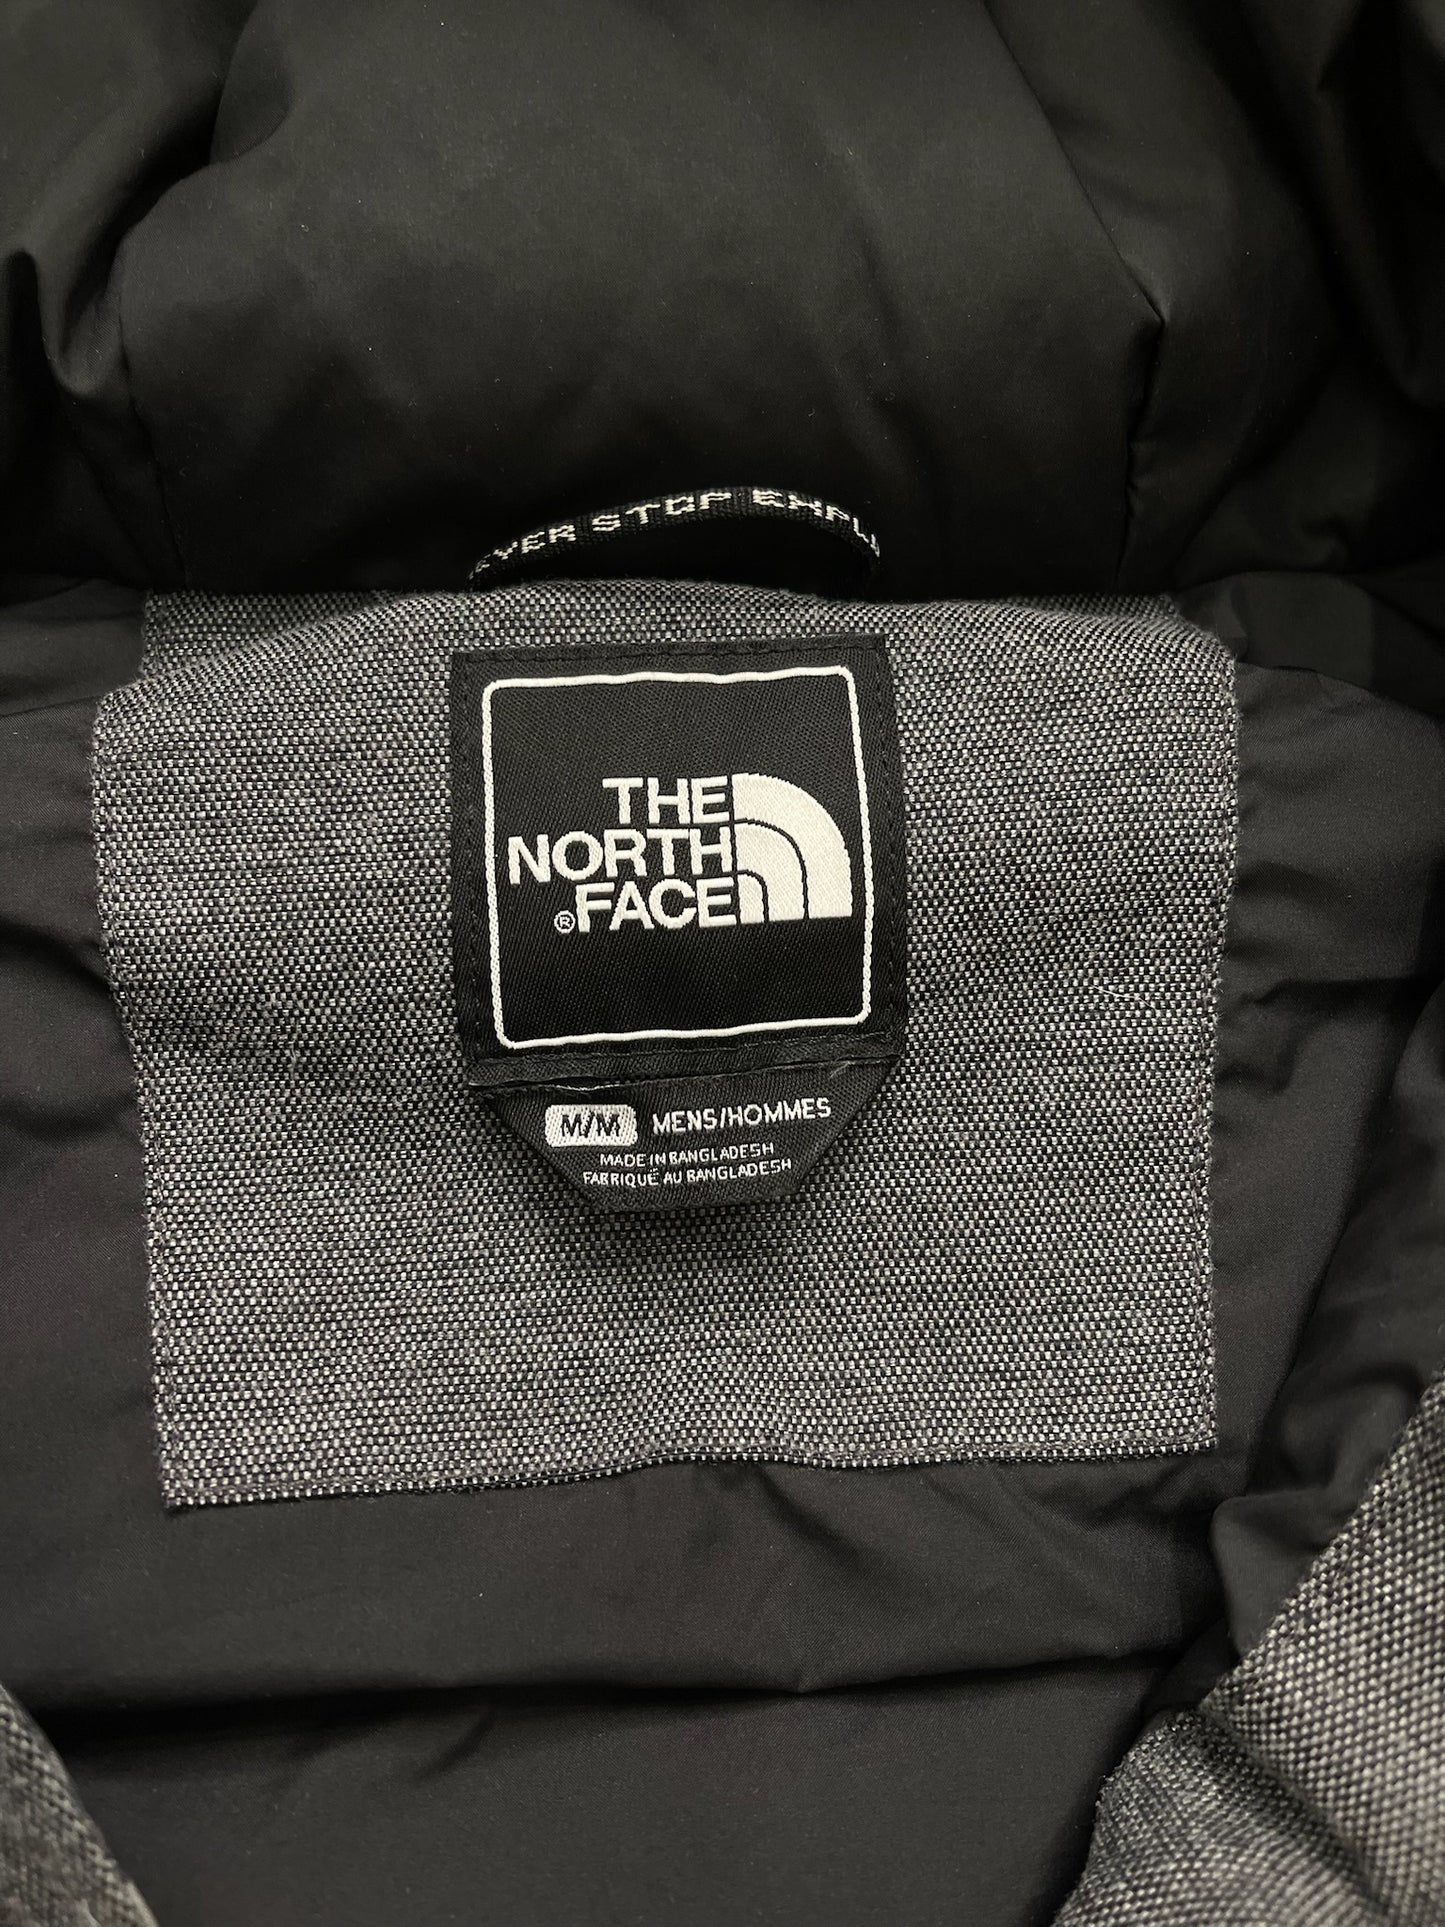 The North Face HyVent Puffer Jacket Size M